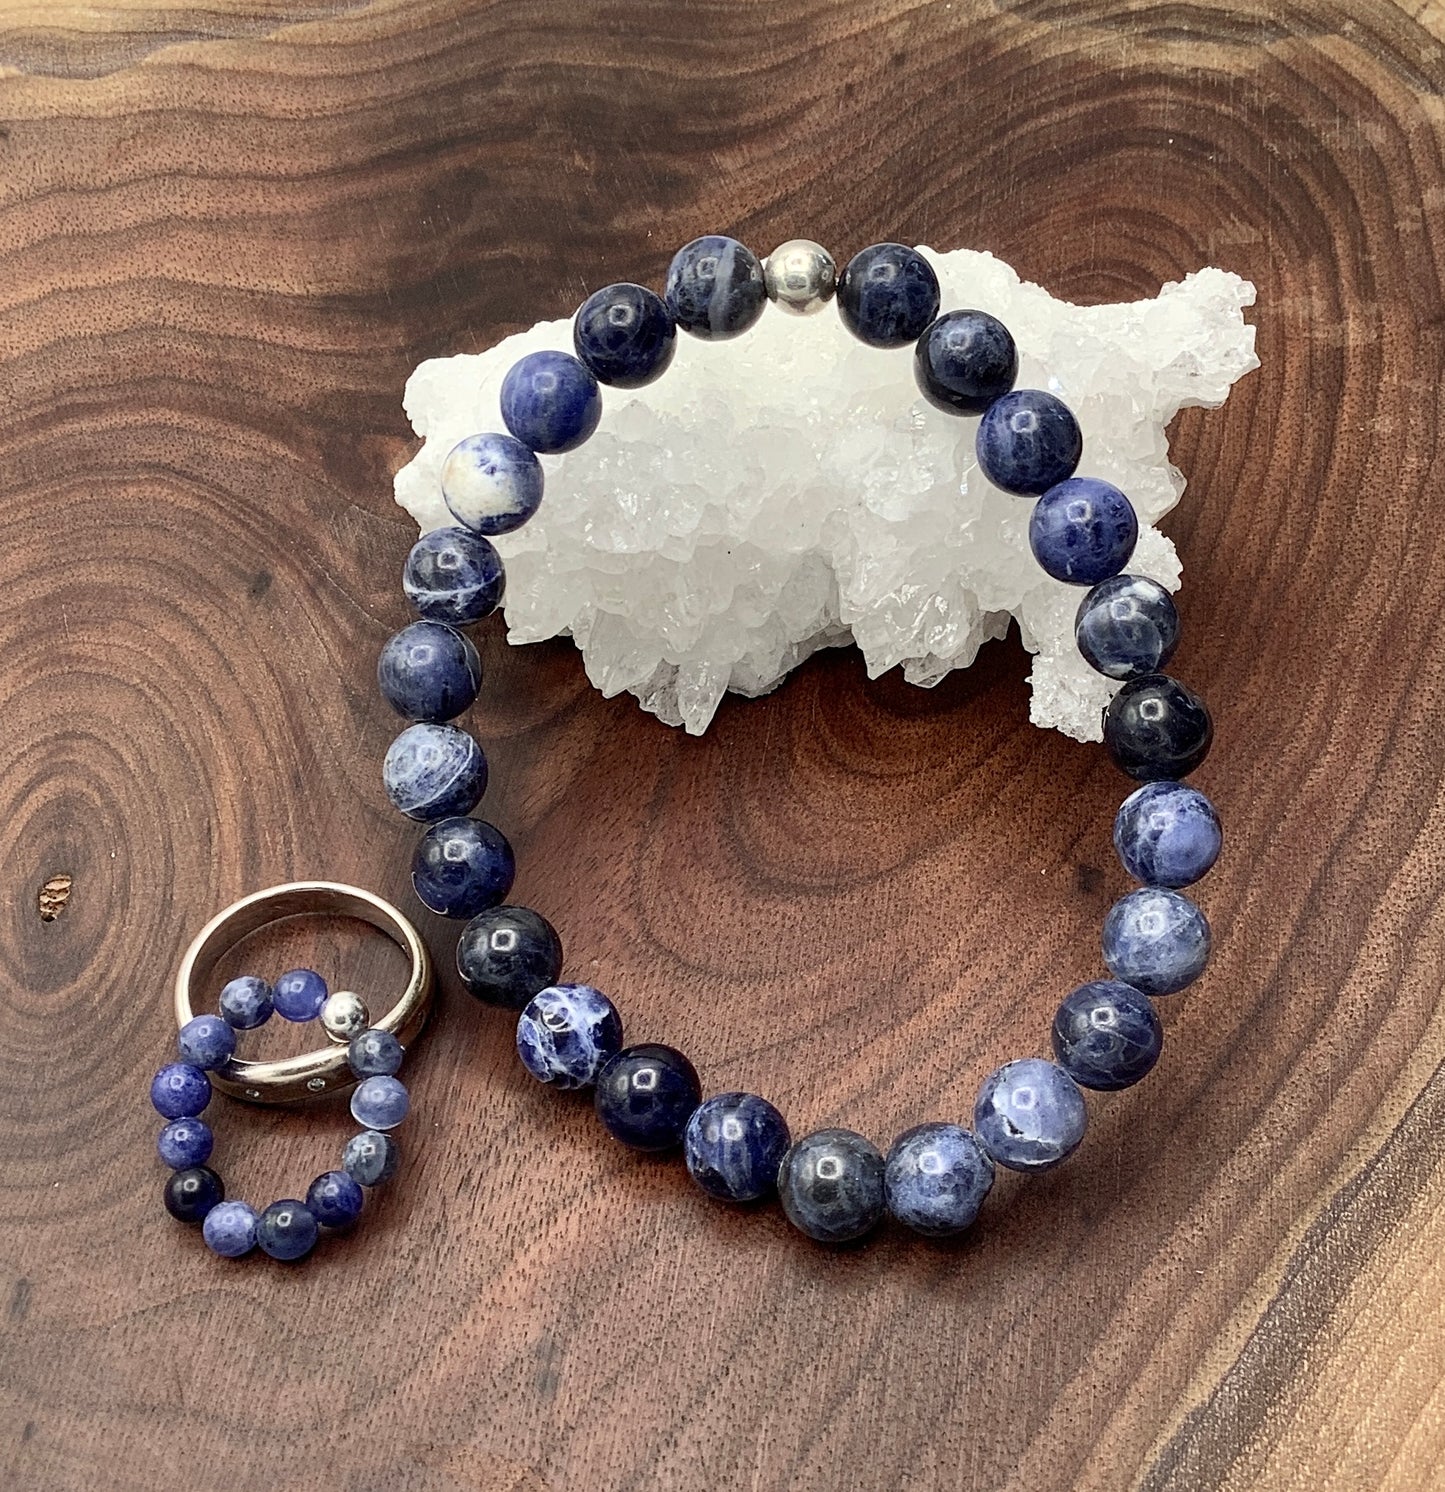 Sodalite bracelet with Sterling Silver Bead and Sodalite ring with Sterling Silver Bead